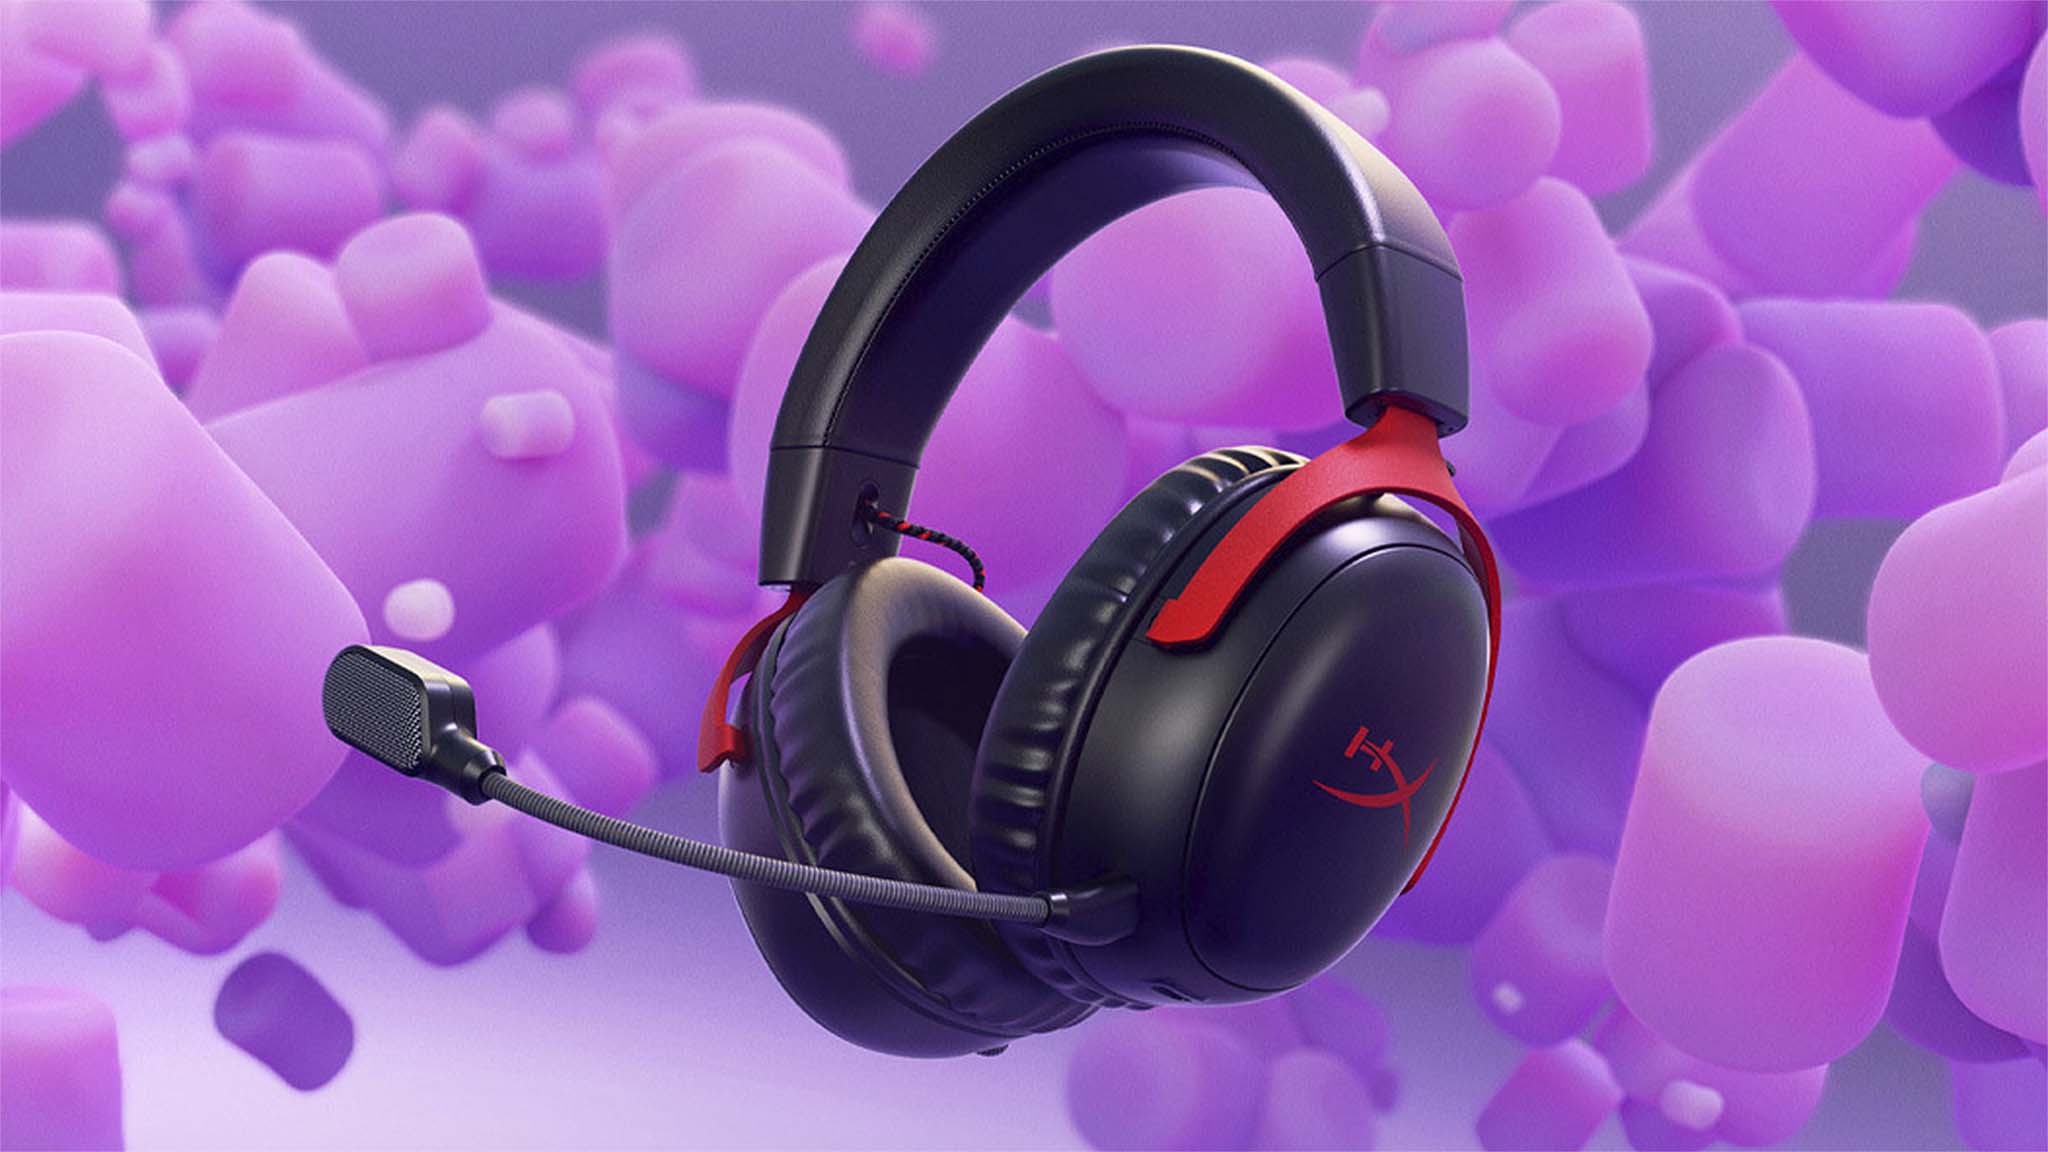 HyperX Cloud 3 Wireless ushers in a new era of improved gaming audio